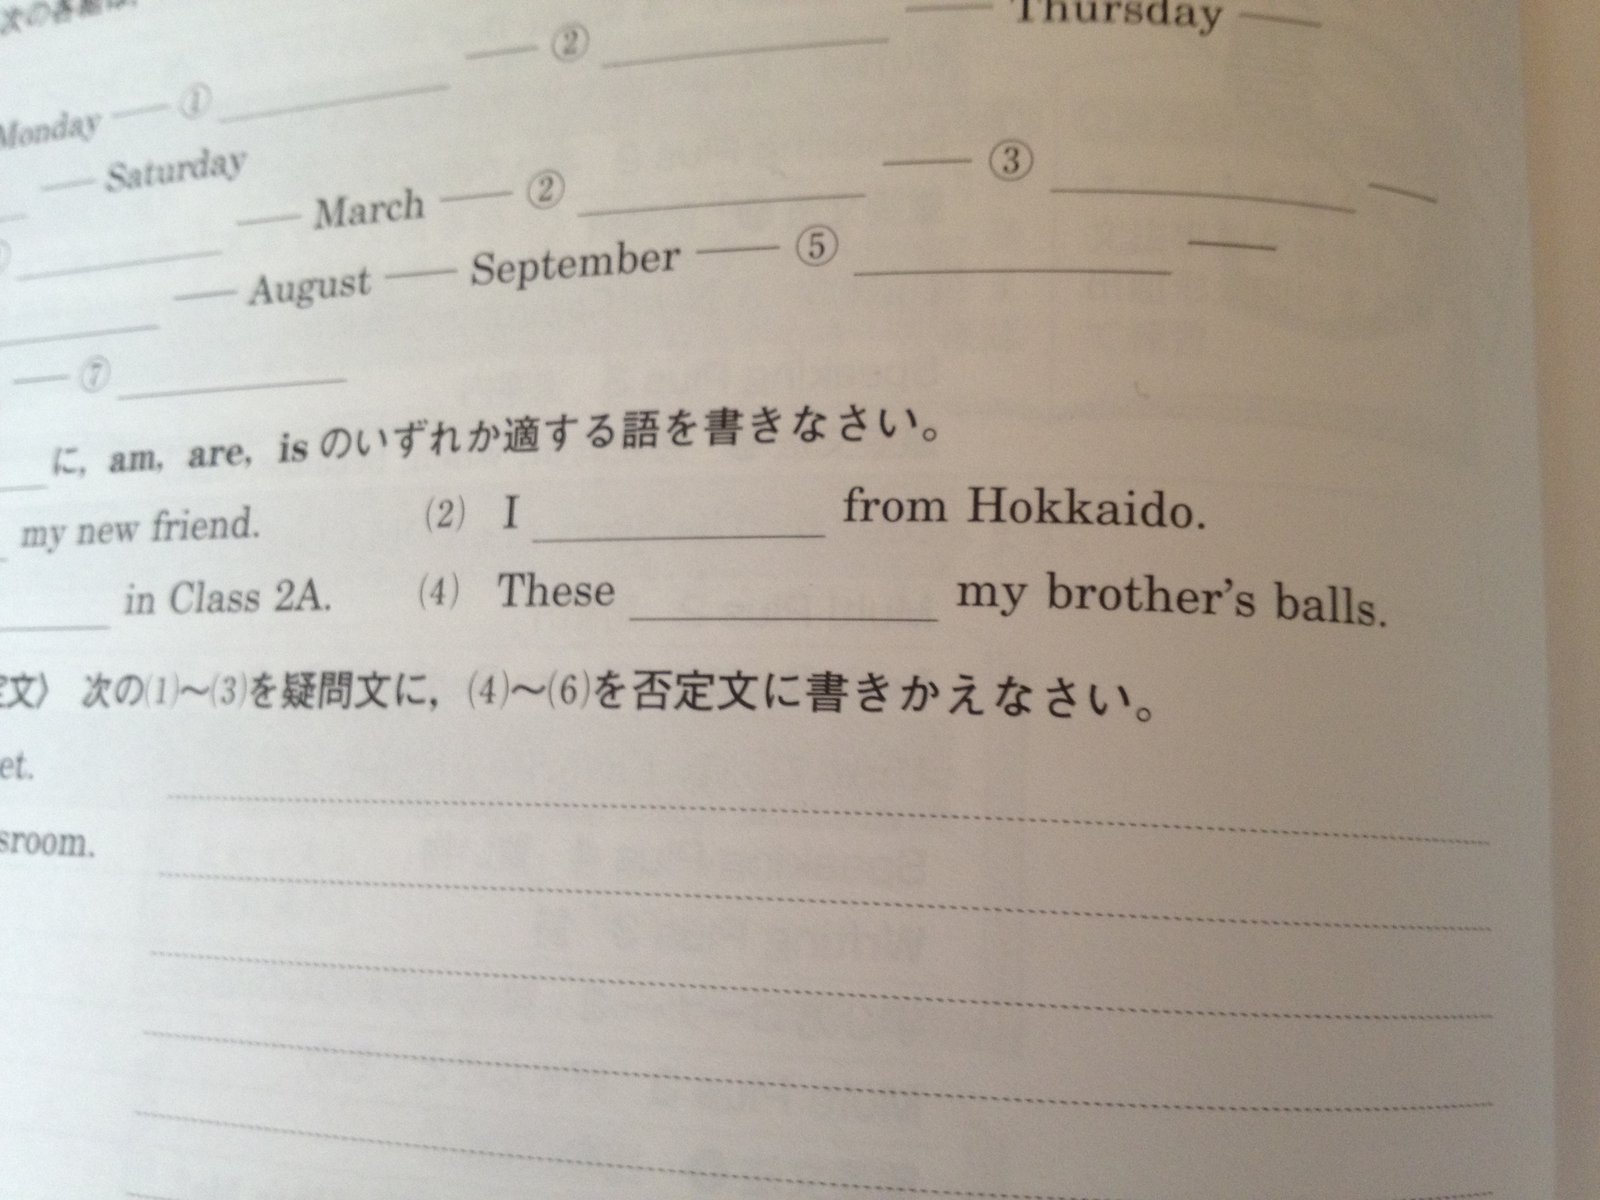 these ____ my brother's balls